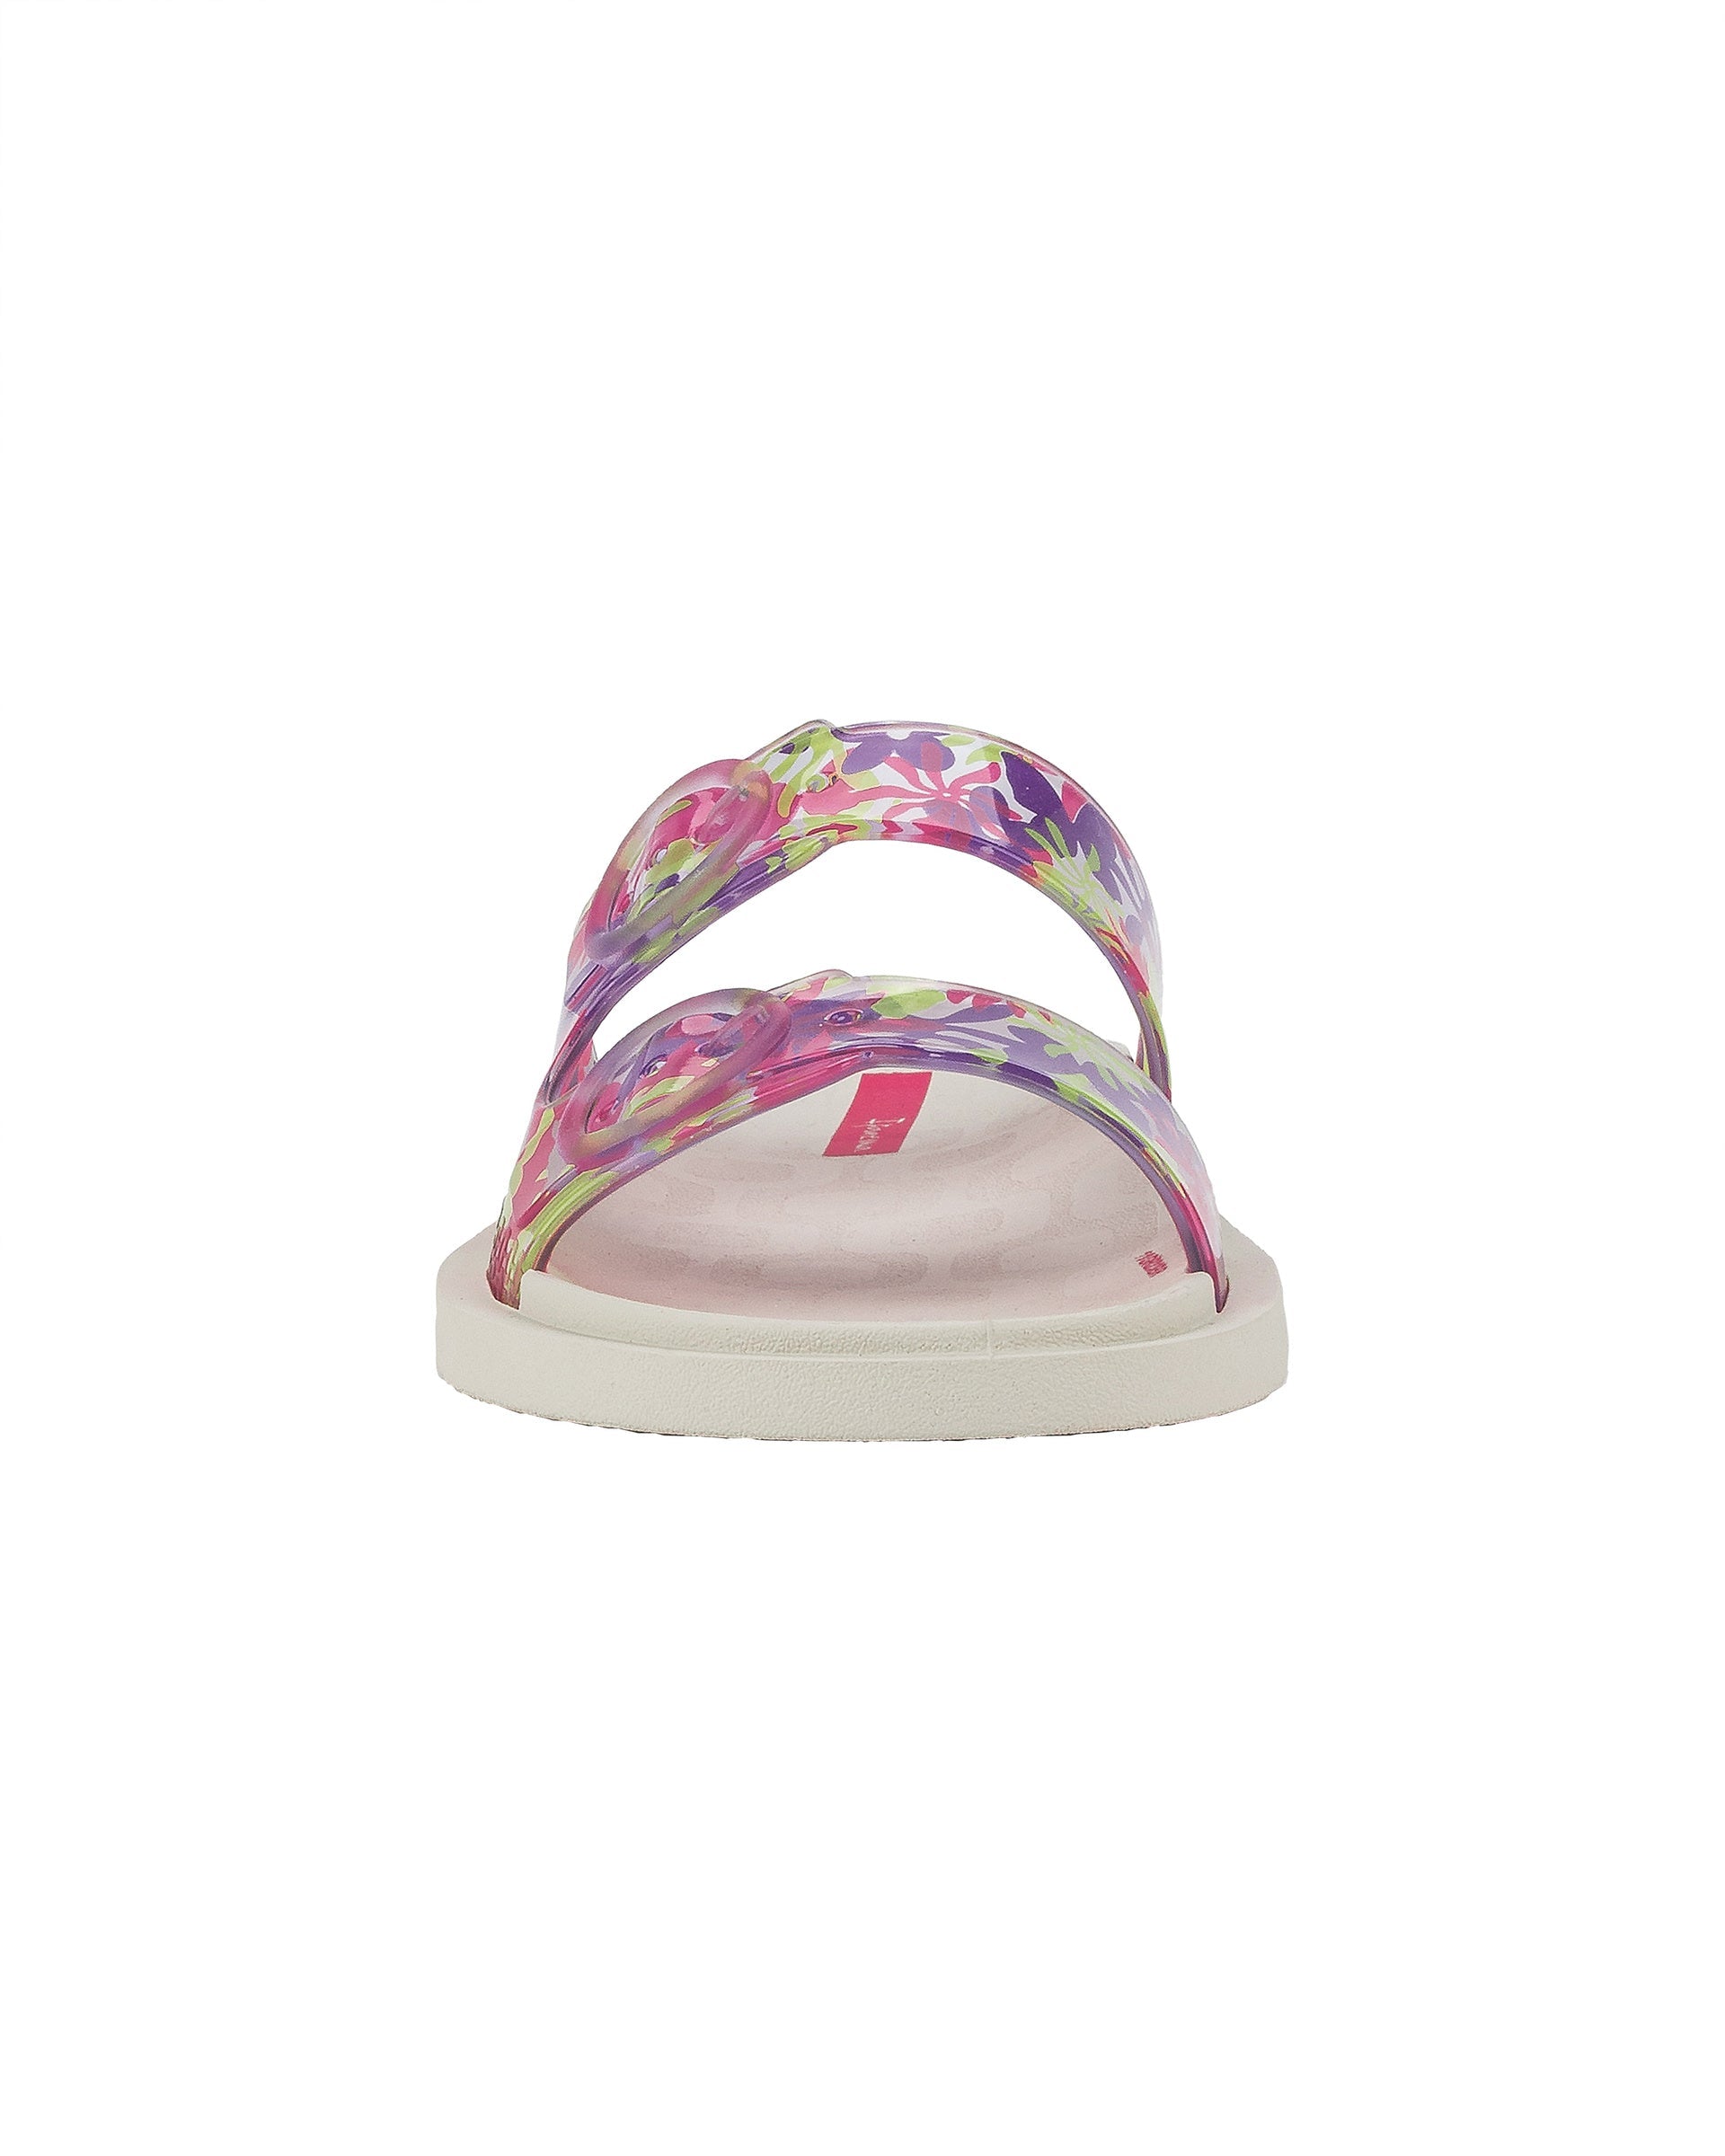 Front view of a beige Ipanema Follow kids slide with floral print on the upper.